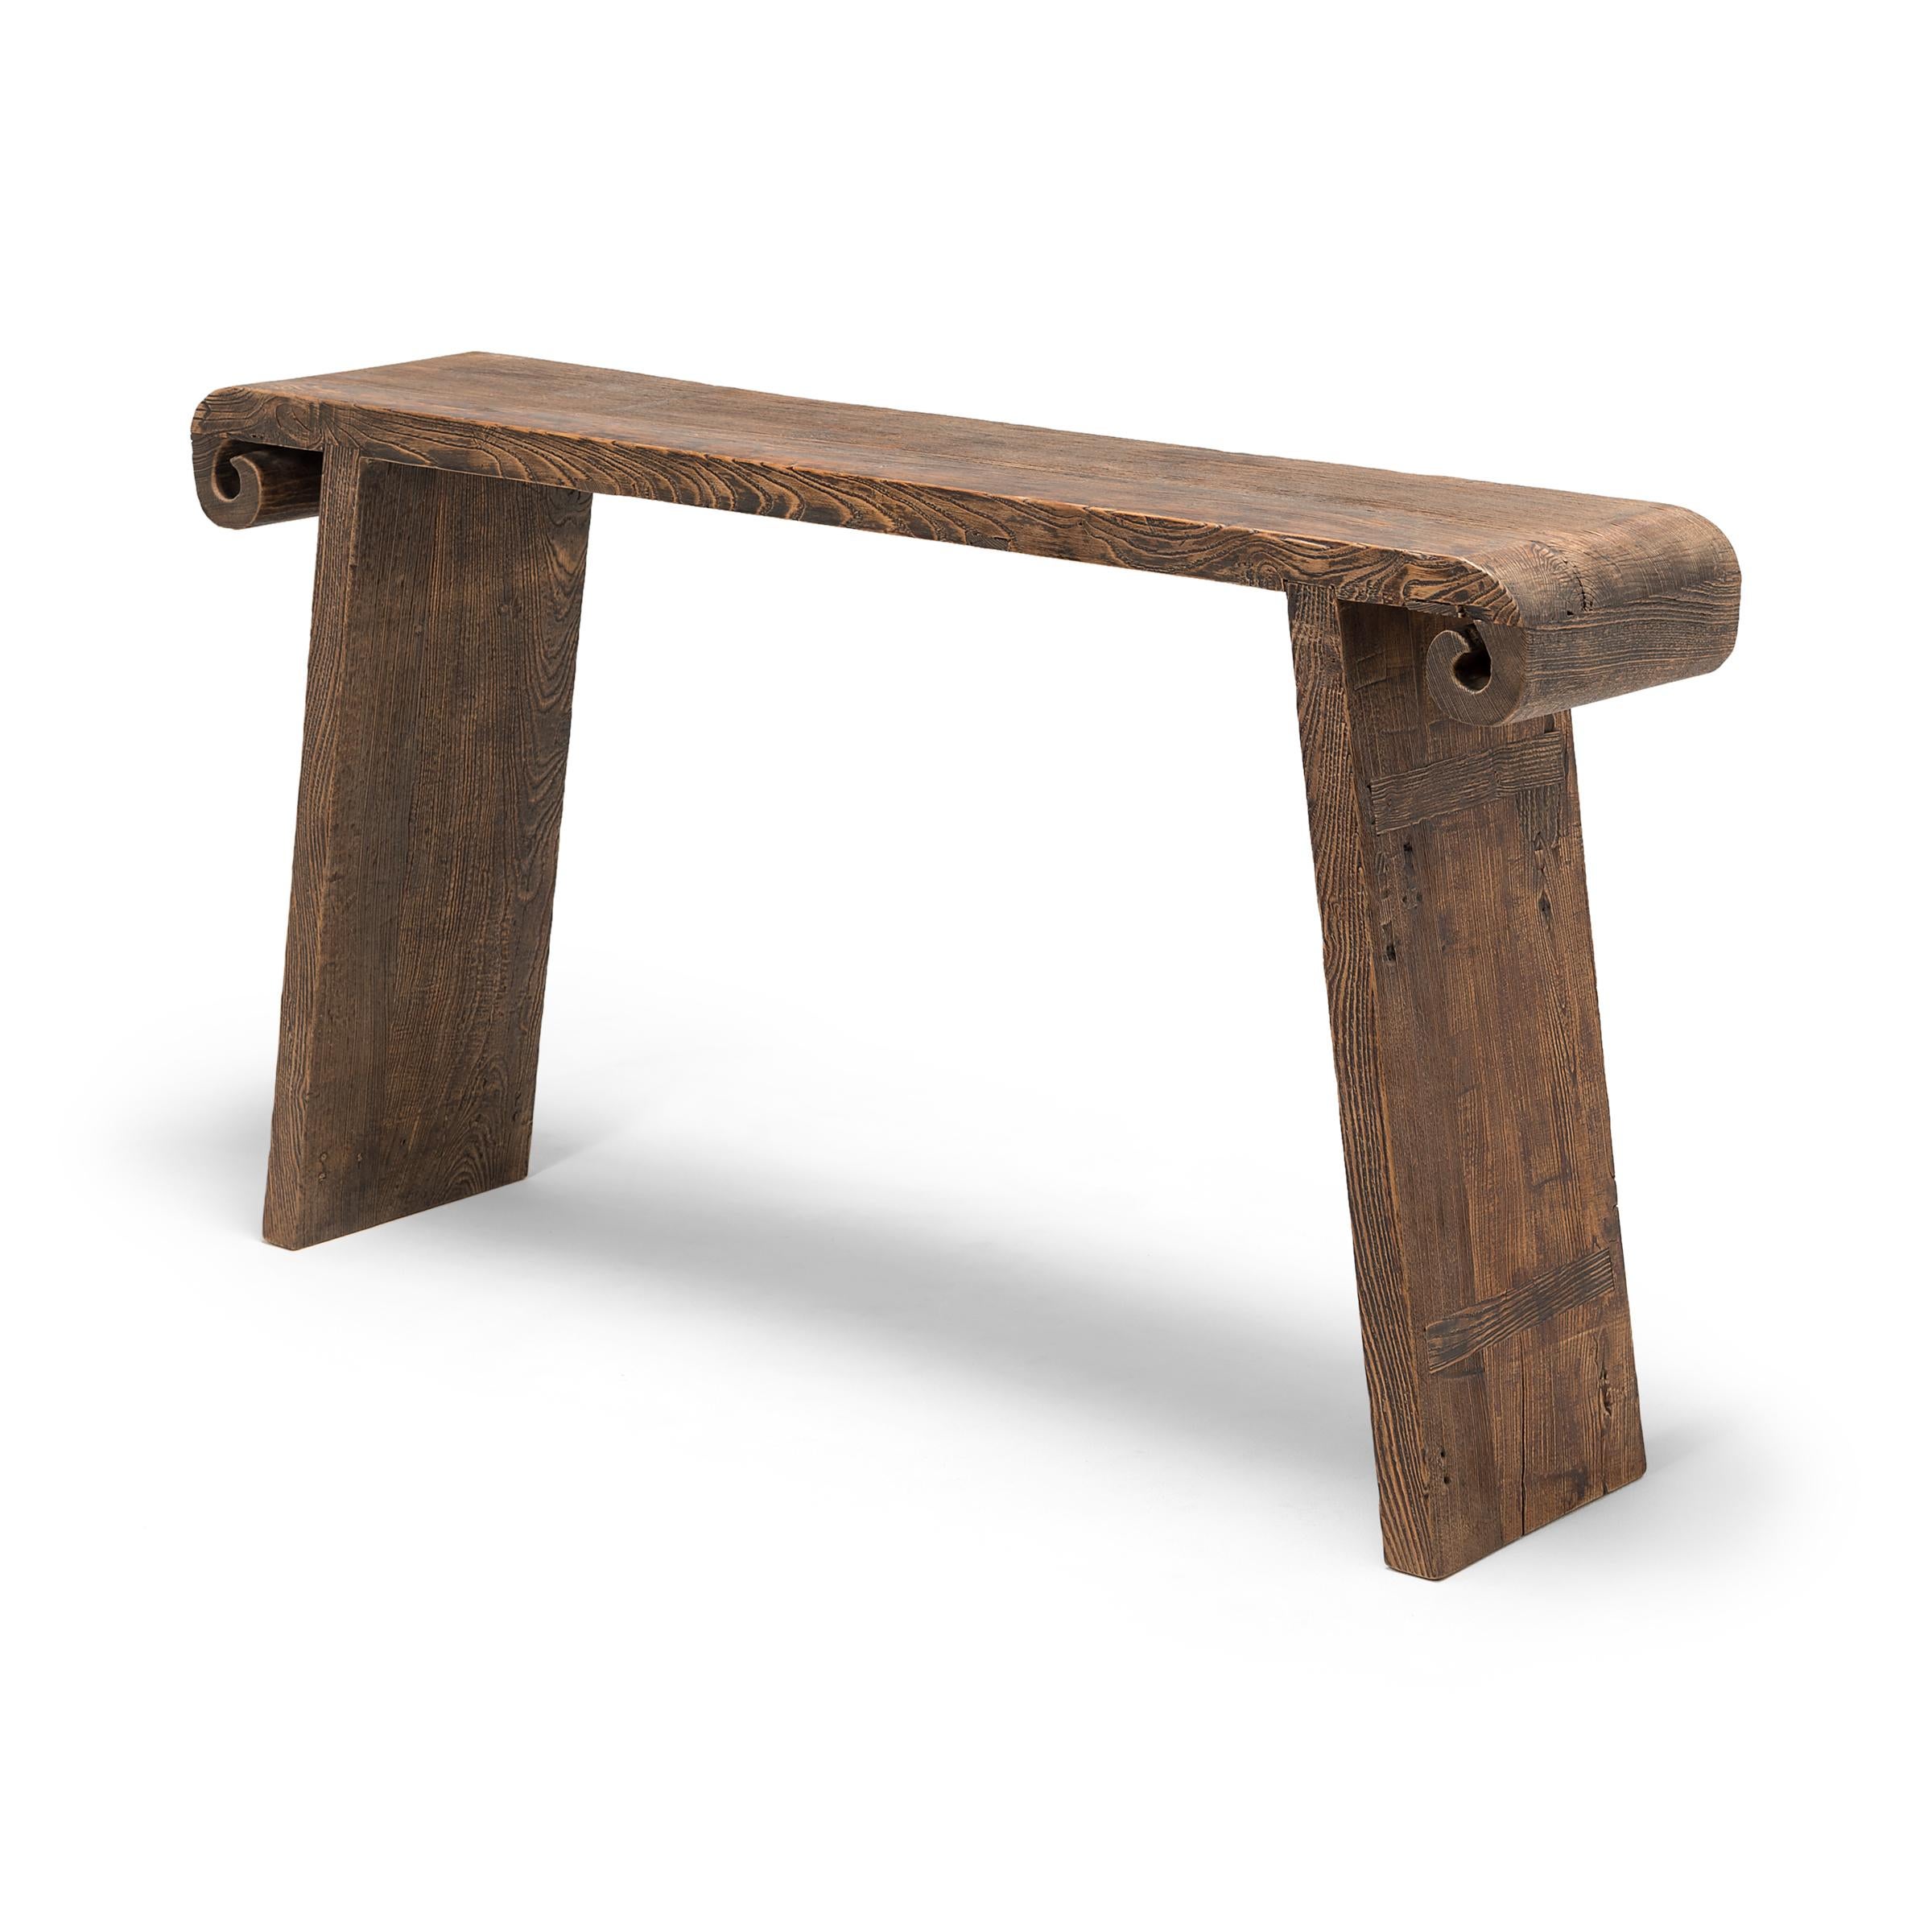 With no stretchers or spandrels, this elegant early 20th century altar table resembles one continuous ribbon. Carefully assembled with mortise-and-tenon joinery, the table's plank top surface ends in two scrolled edges, evoking the image of an